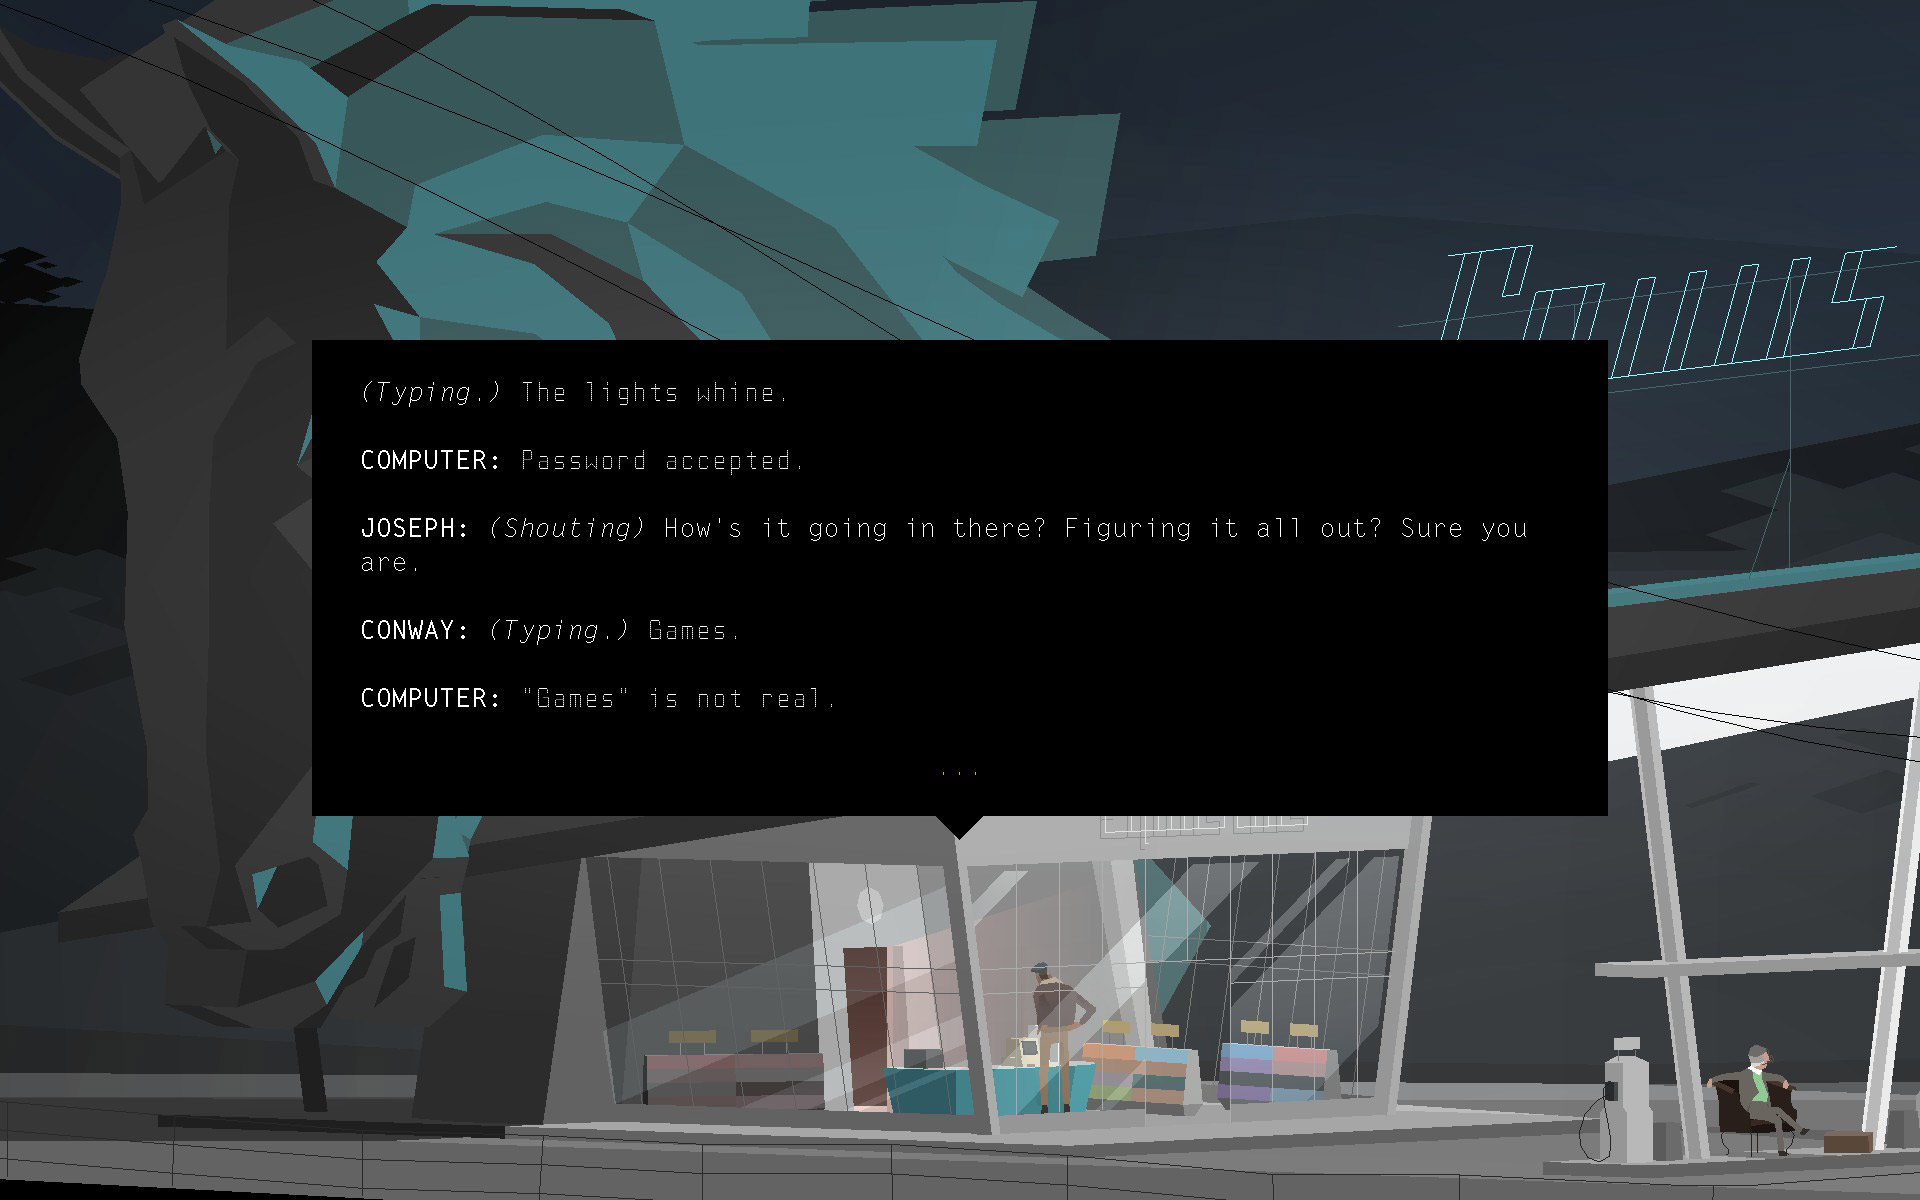 Kentucky Route Zero: Act I. Conway is typing into the computer. Computer: "Games is not real".